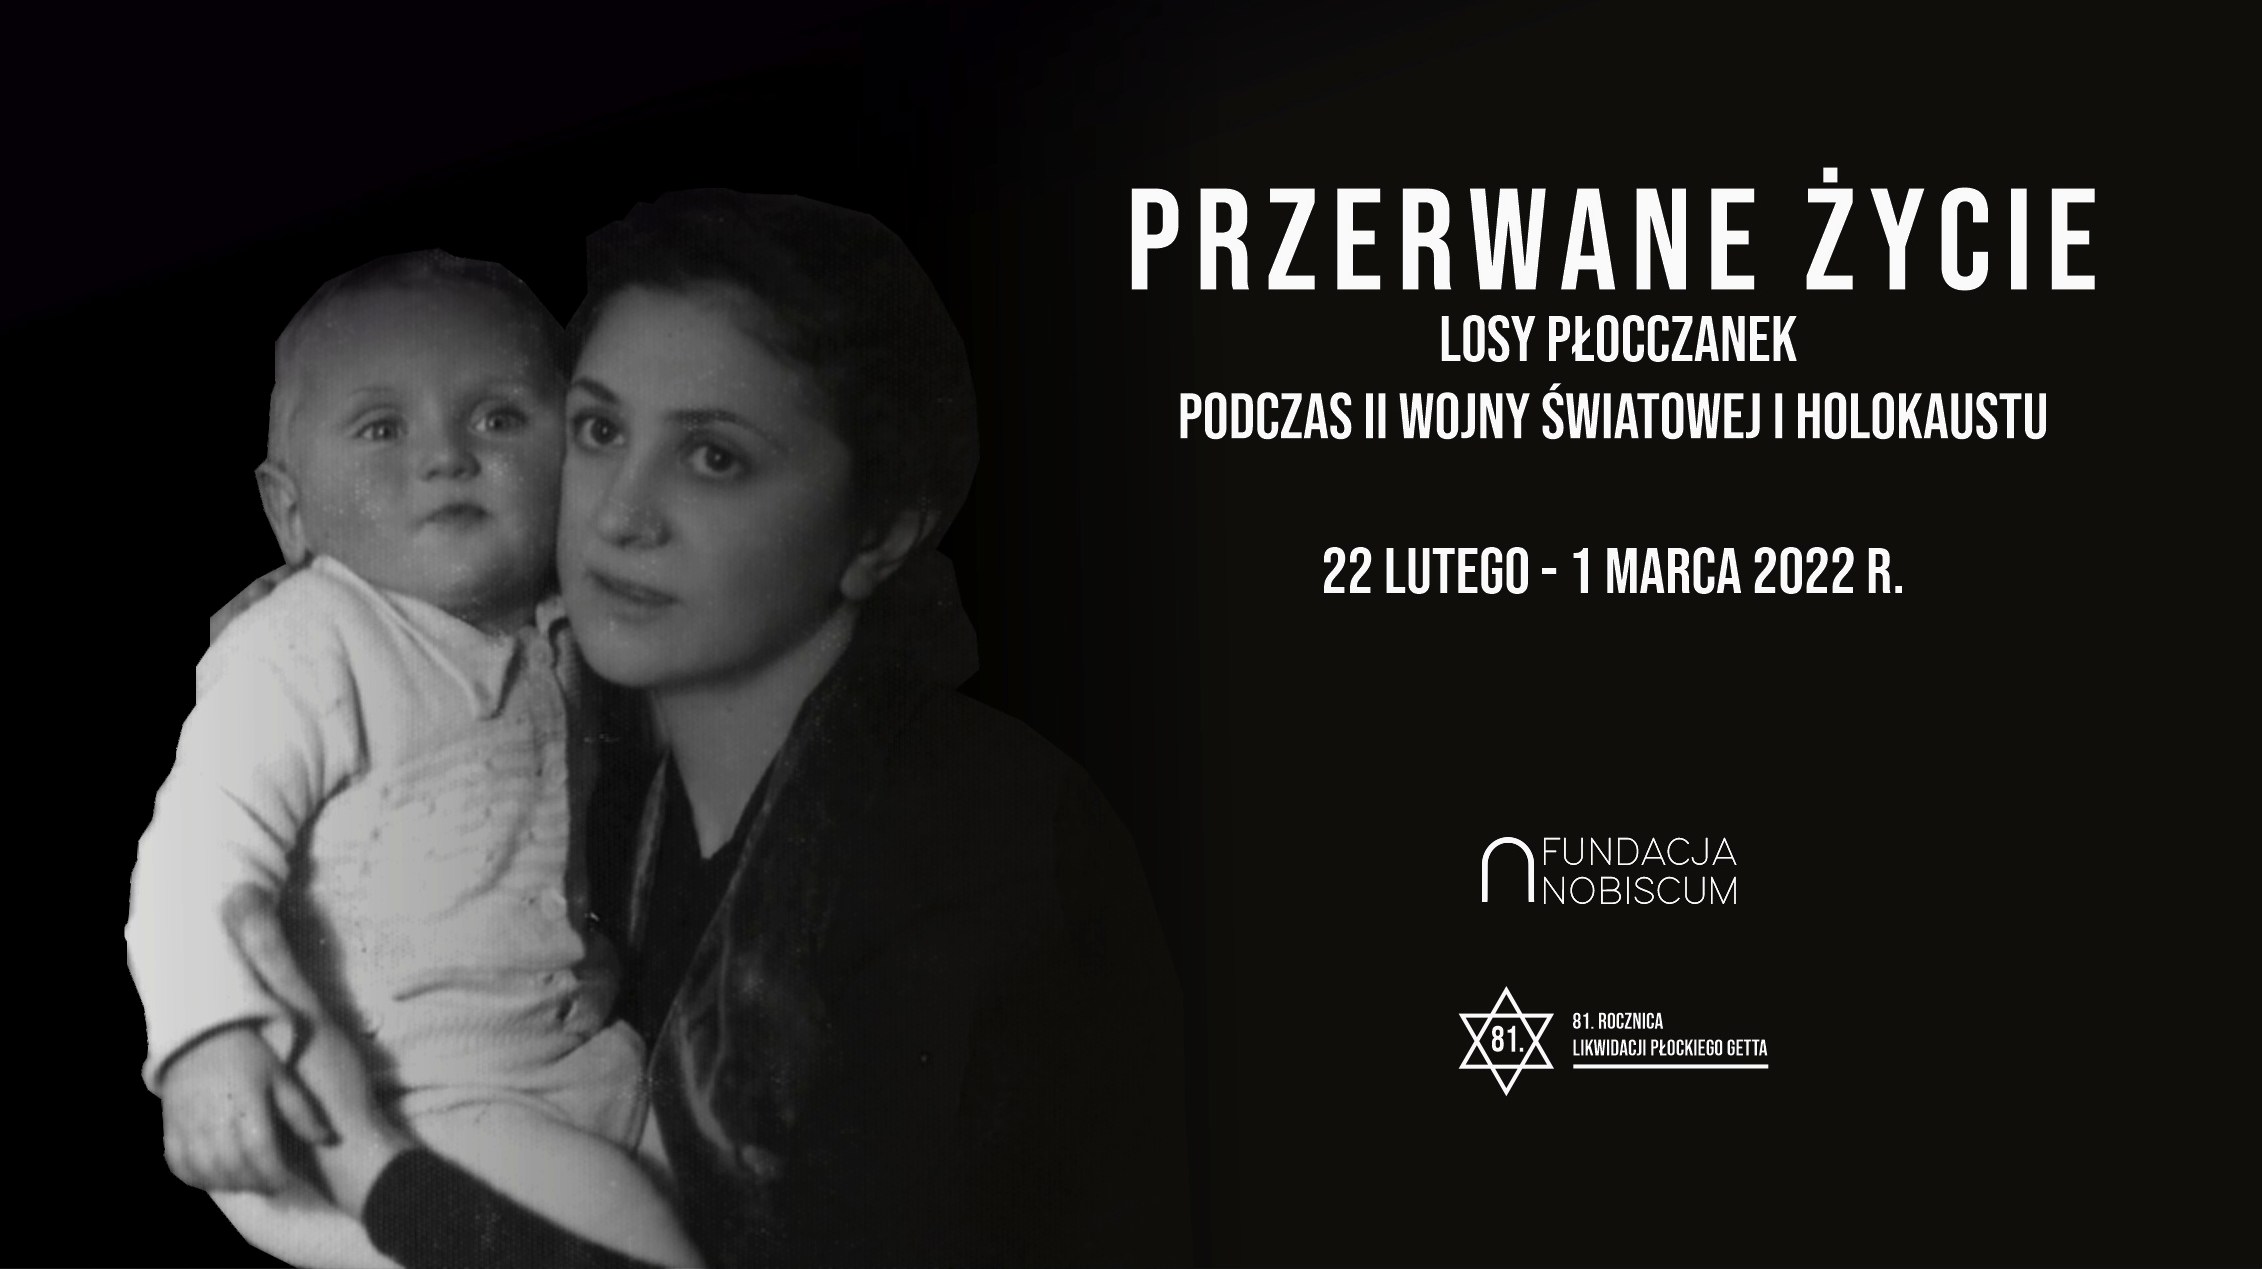 81st anniversary of the liquidation of the ghetto in Płock. Broken life. The fate of women of Płock during World War II and the Holocaust